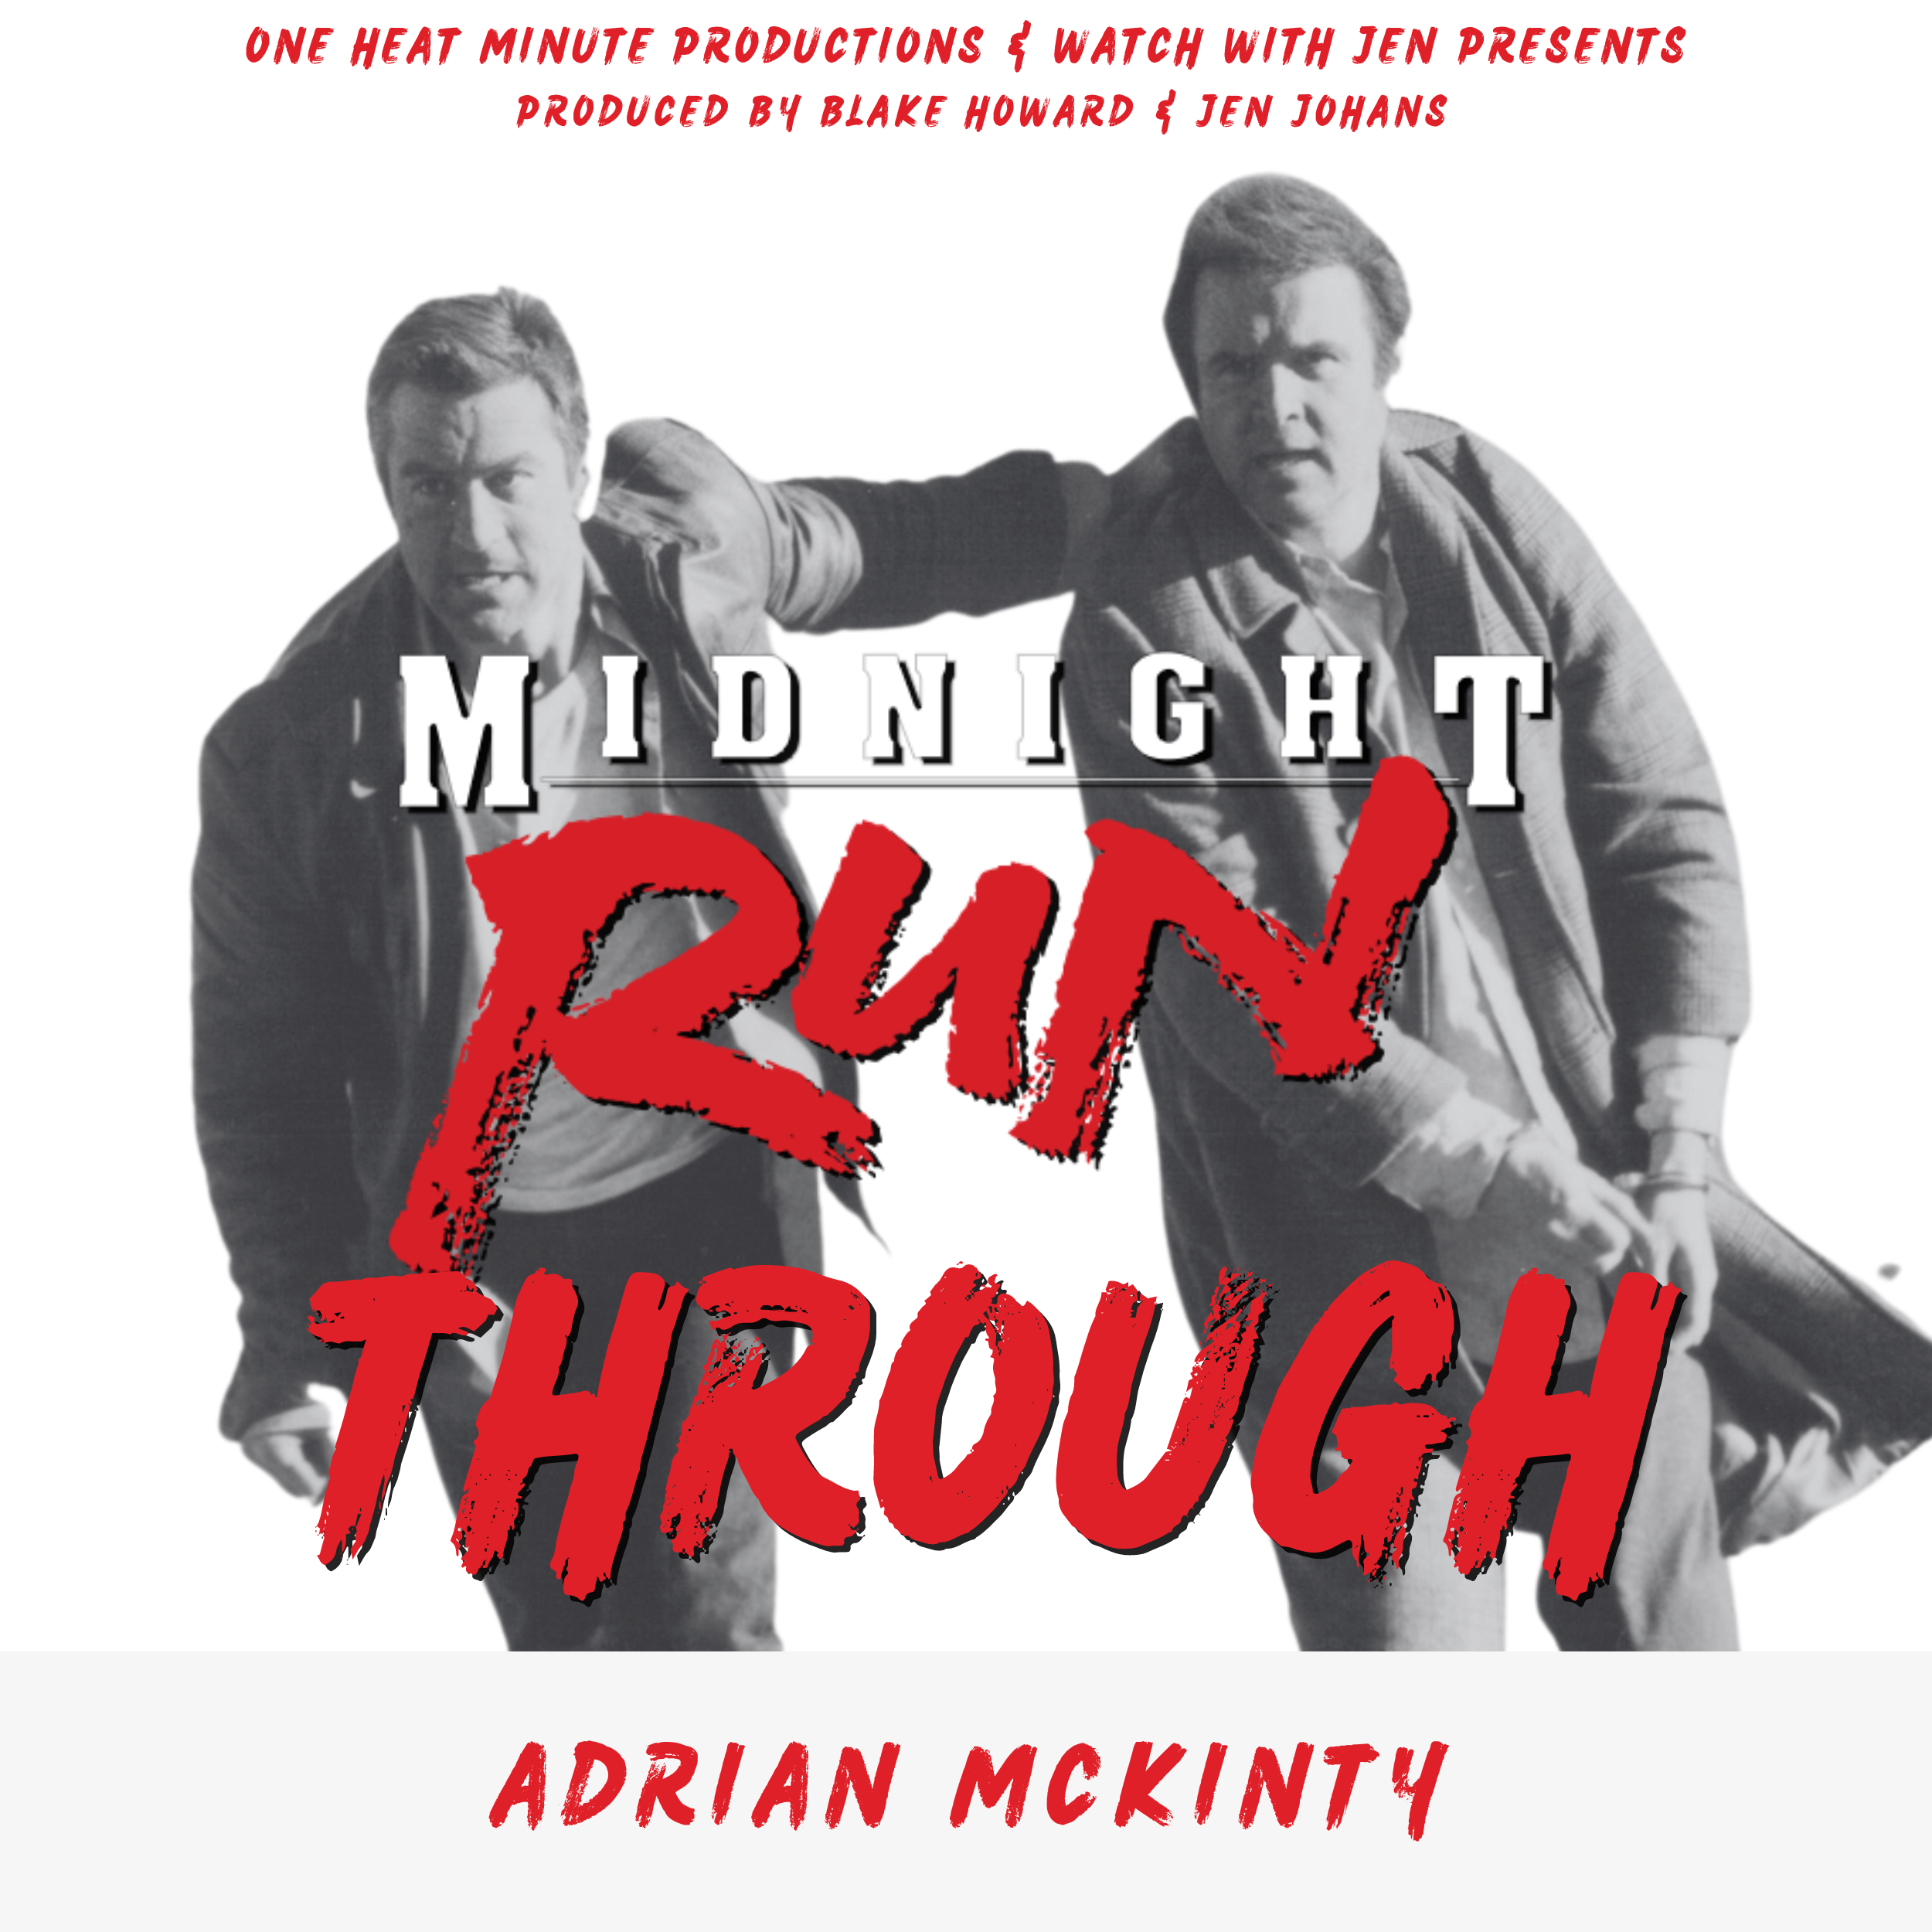 MIDNIGHT RUN-THROUGH - Episode 7 with Adrian McKinty (From One Heat Minute Productions & Watch With Jen)